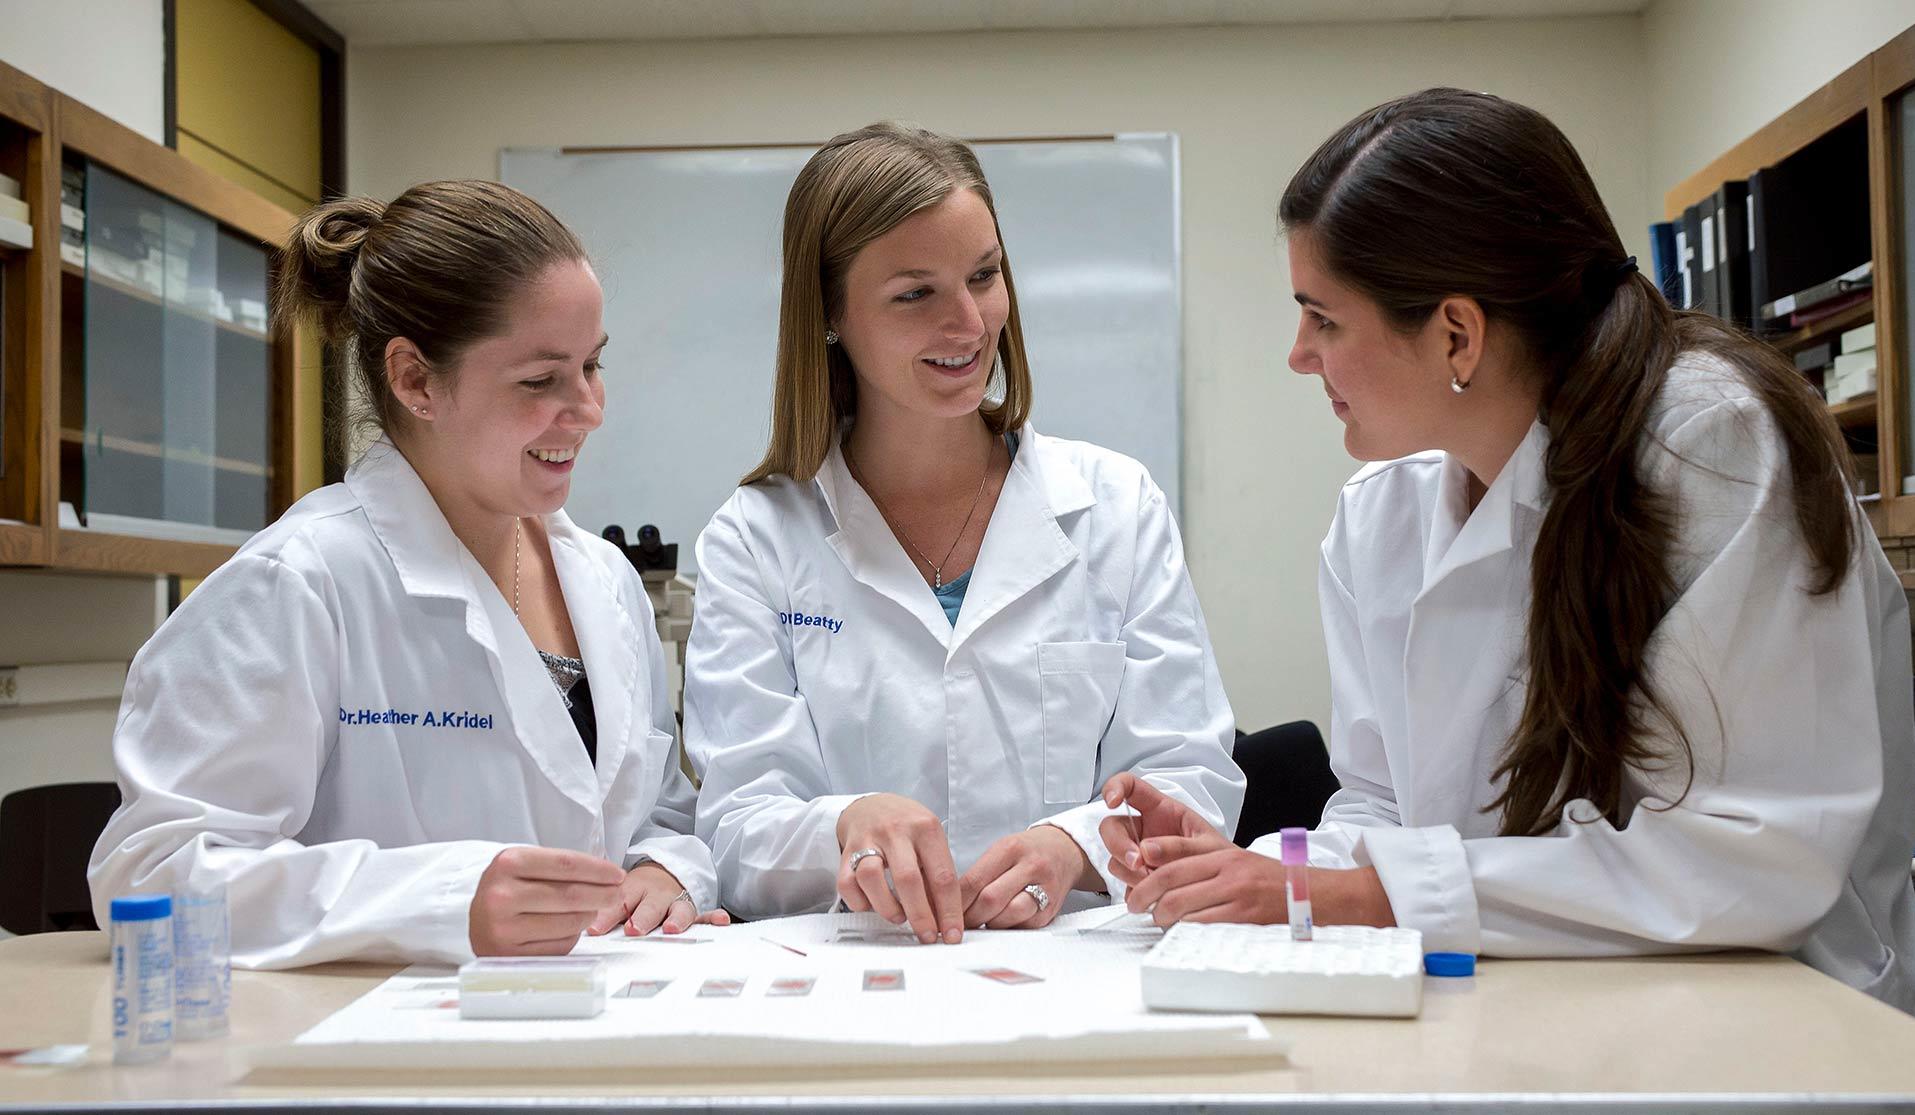 Three student veterinarians talking to each other